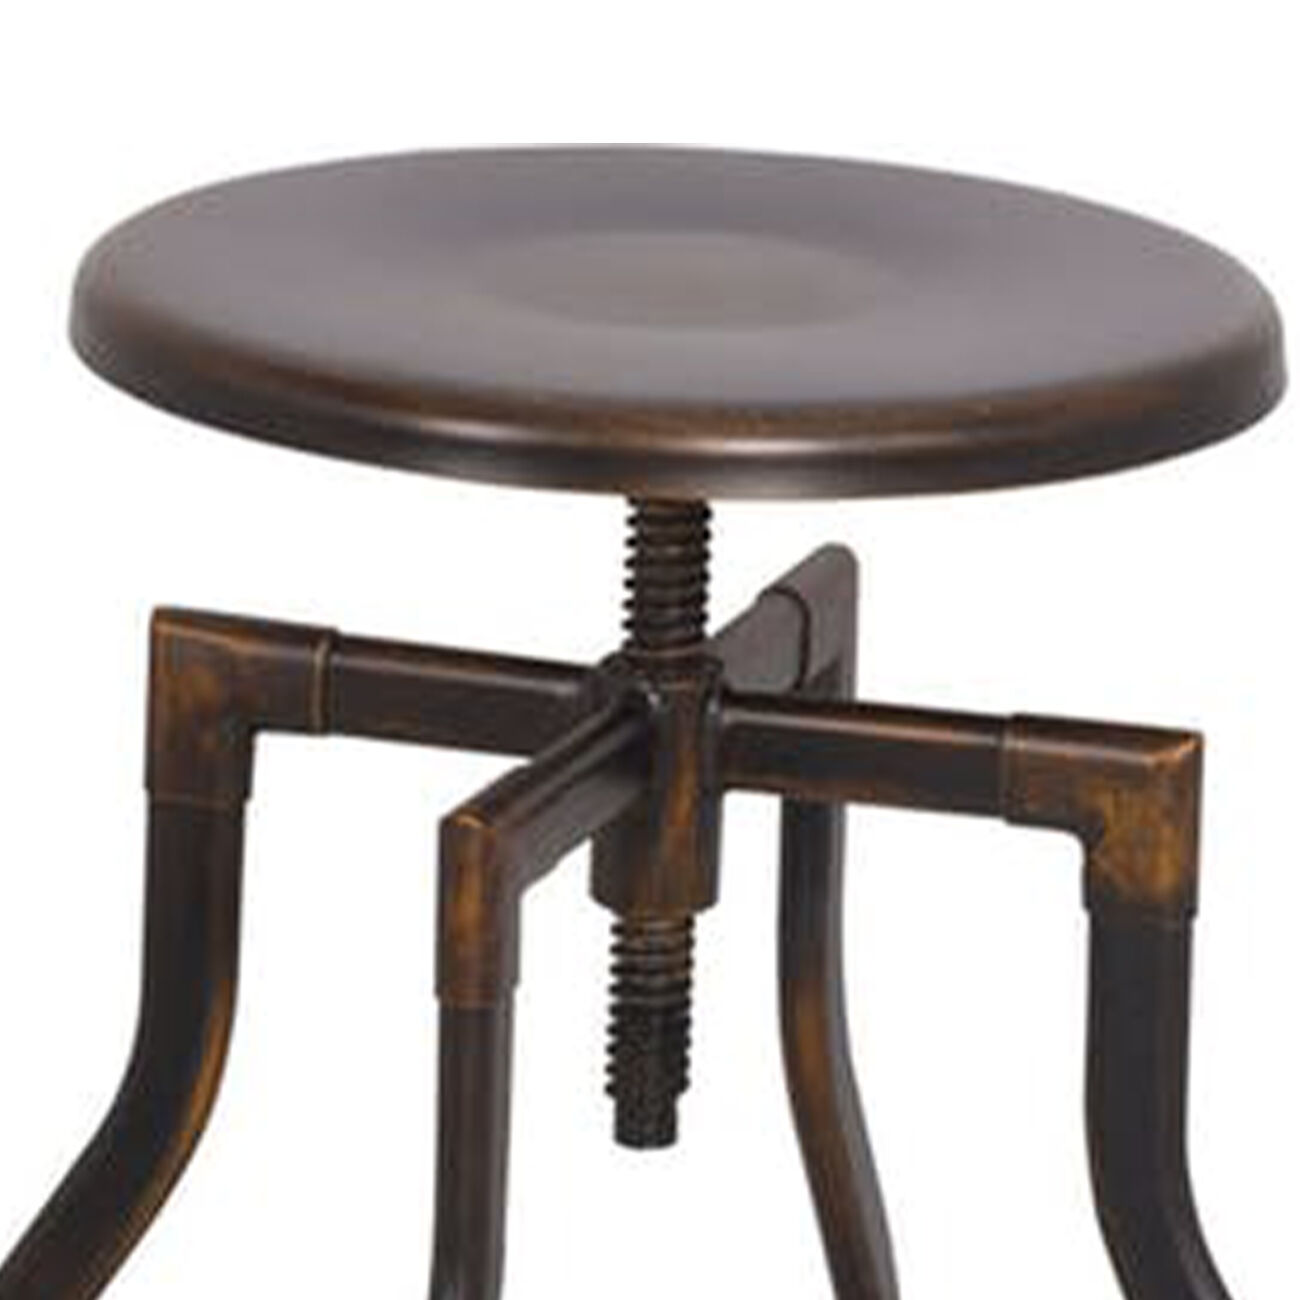 Adjustable Stool with Swivel, Antique Copper